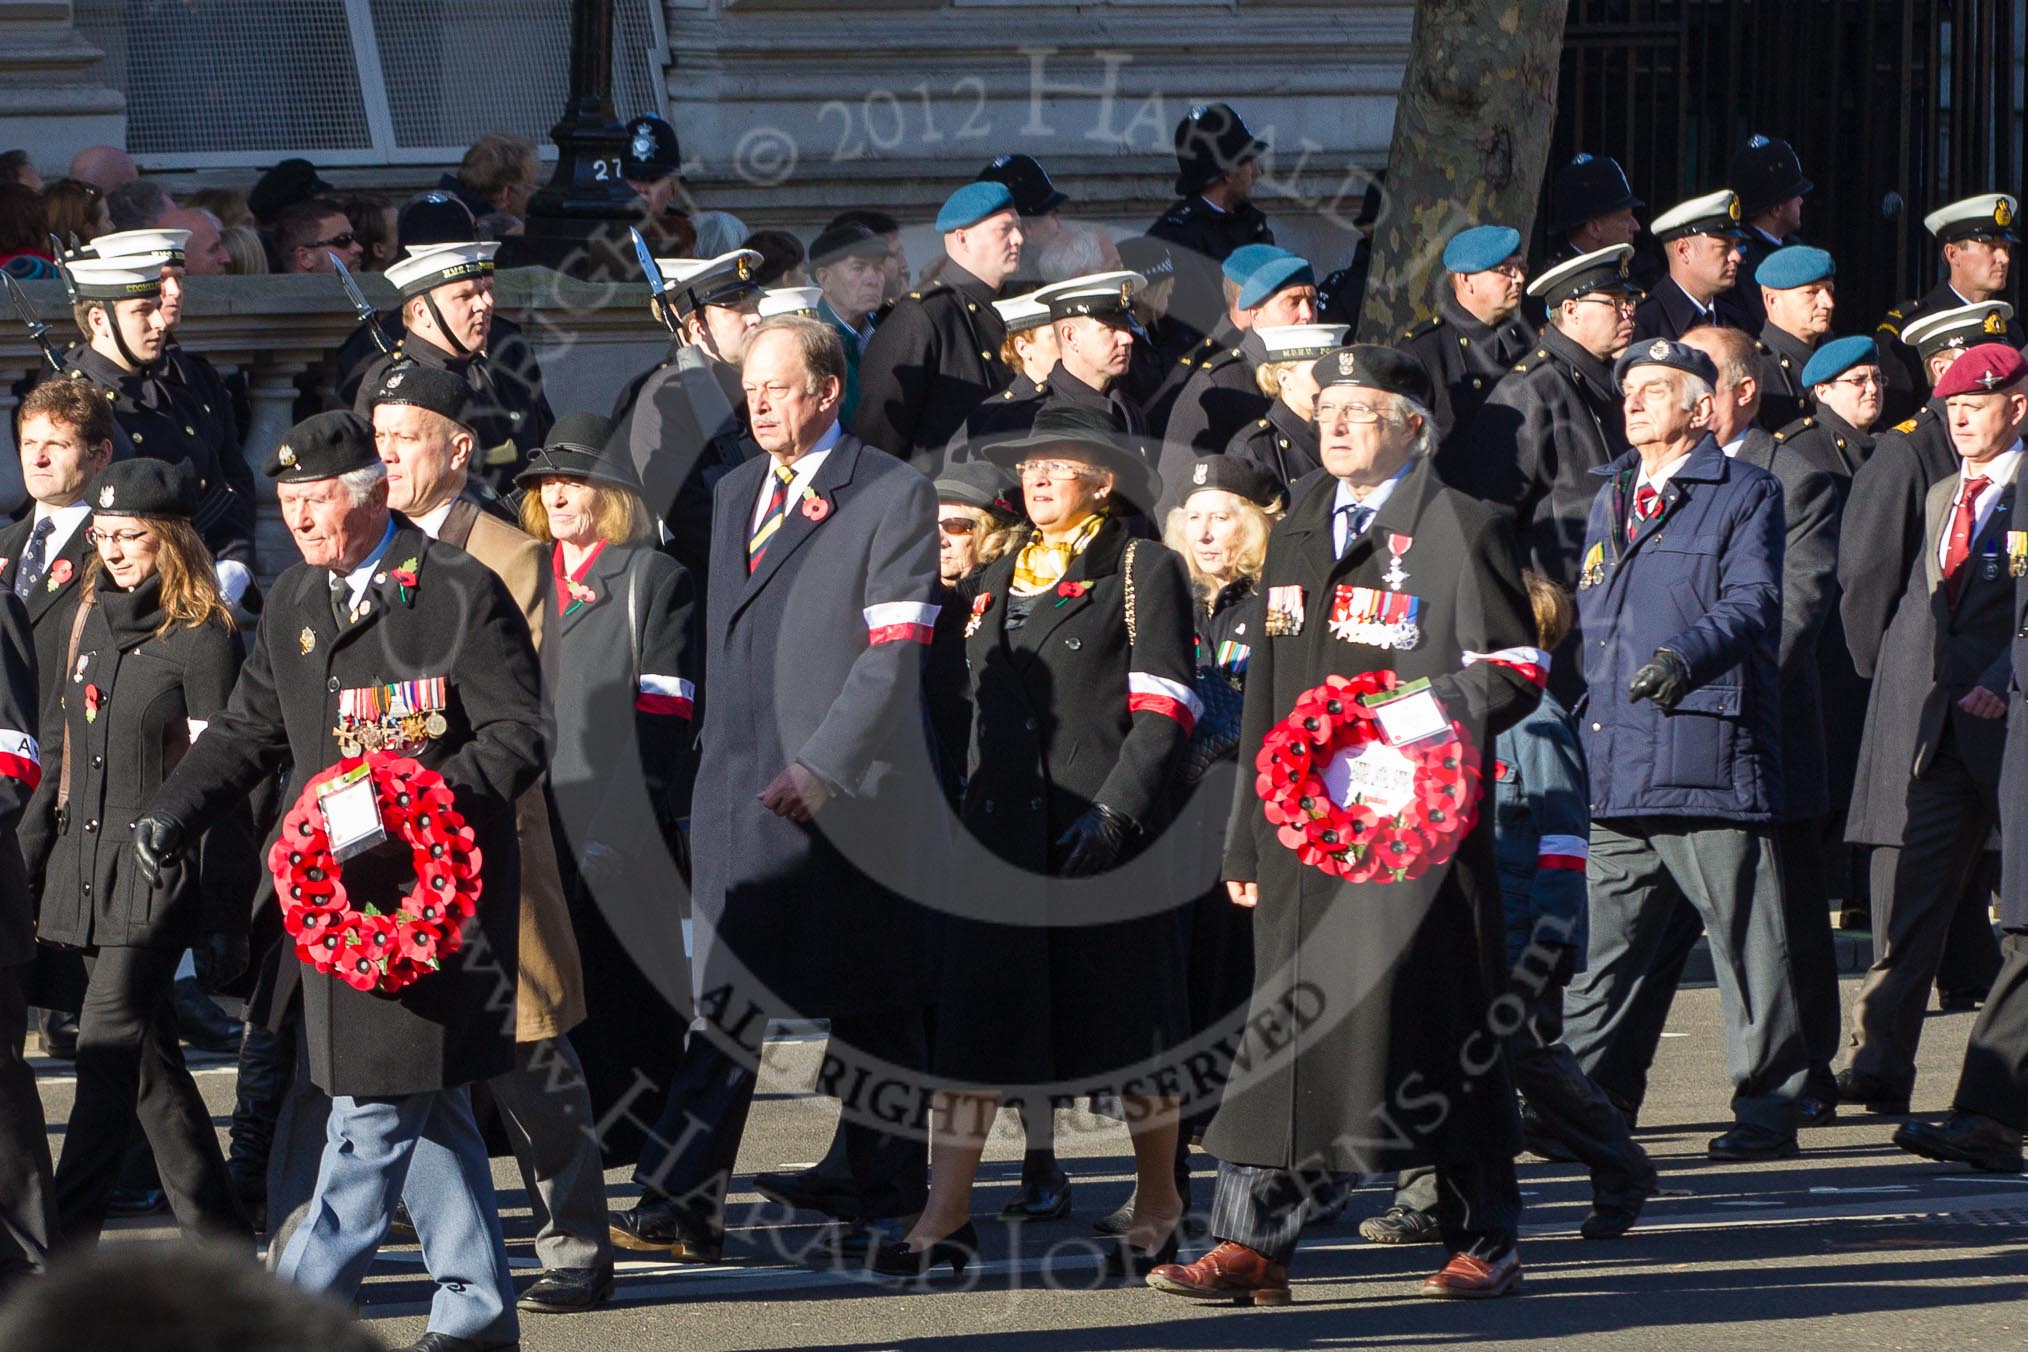 Remembrance Sunday 2012 Cenotaph March Past: Group D11 - Polish Ex-Combatants Association in Great Britain..
Whitehall, Cenotaph,
London SW1,

United Kingdom,
on 11 November 2012 at 12:06, image #1310